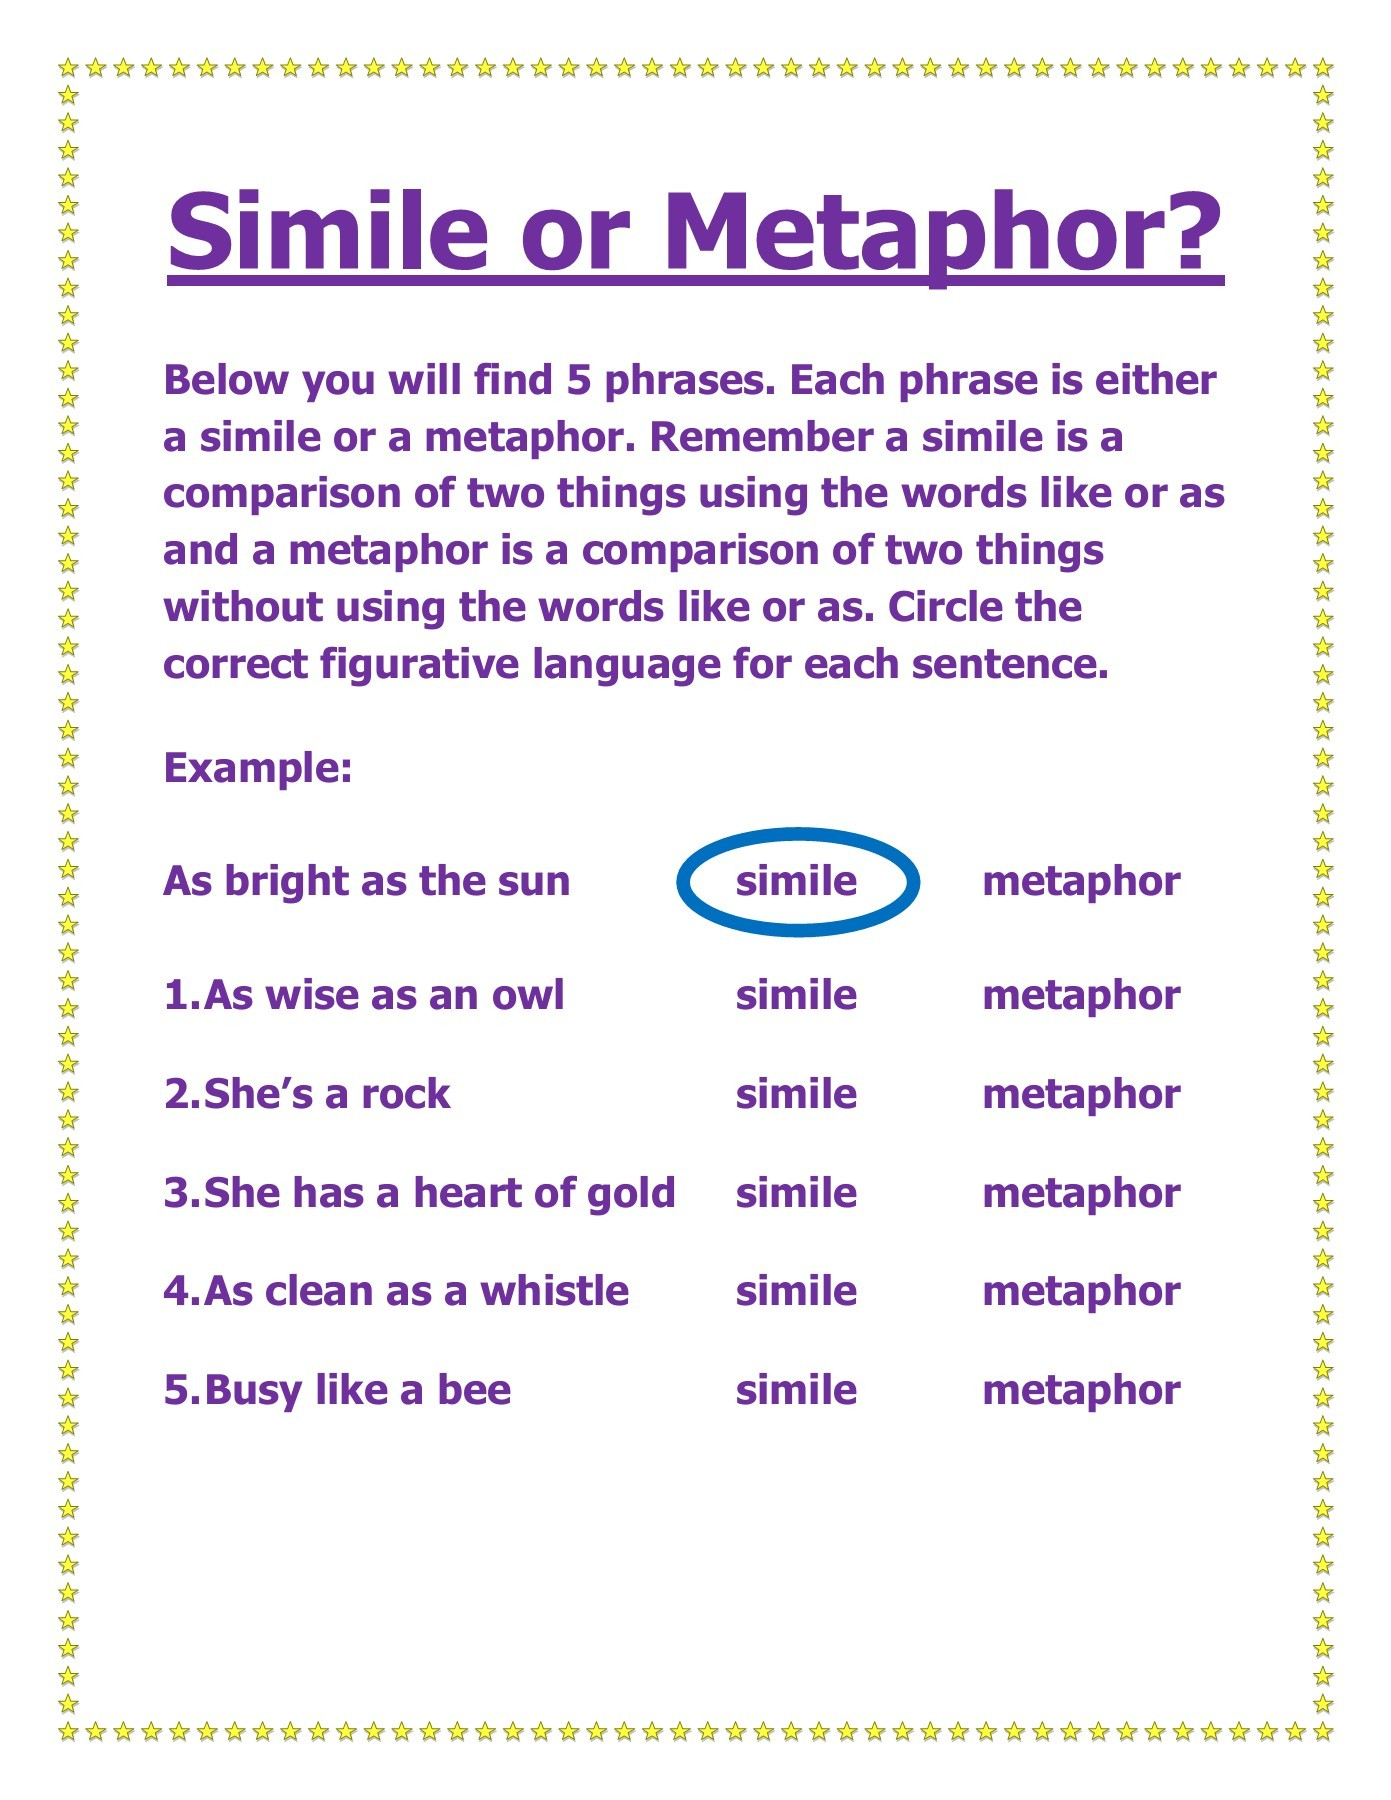 What Is A Metaphor Definition And Examples Grammarly